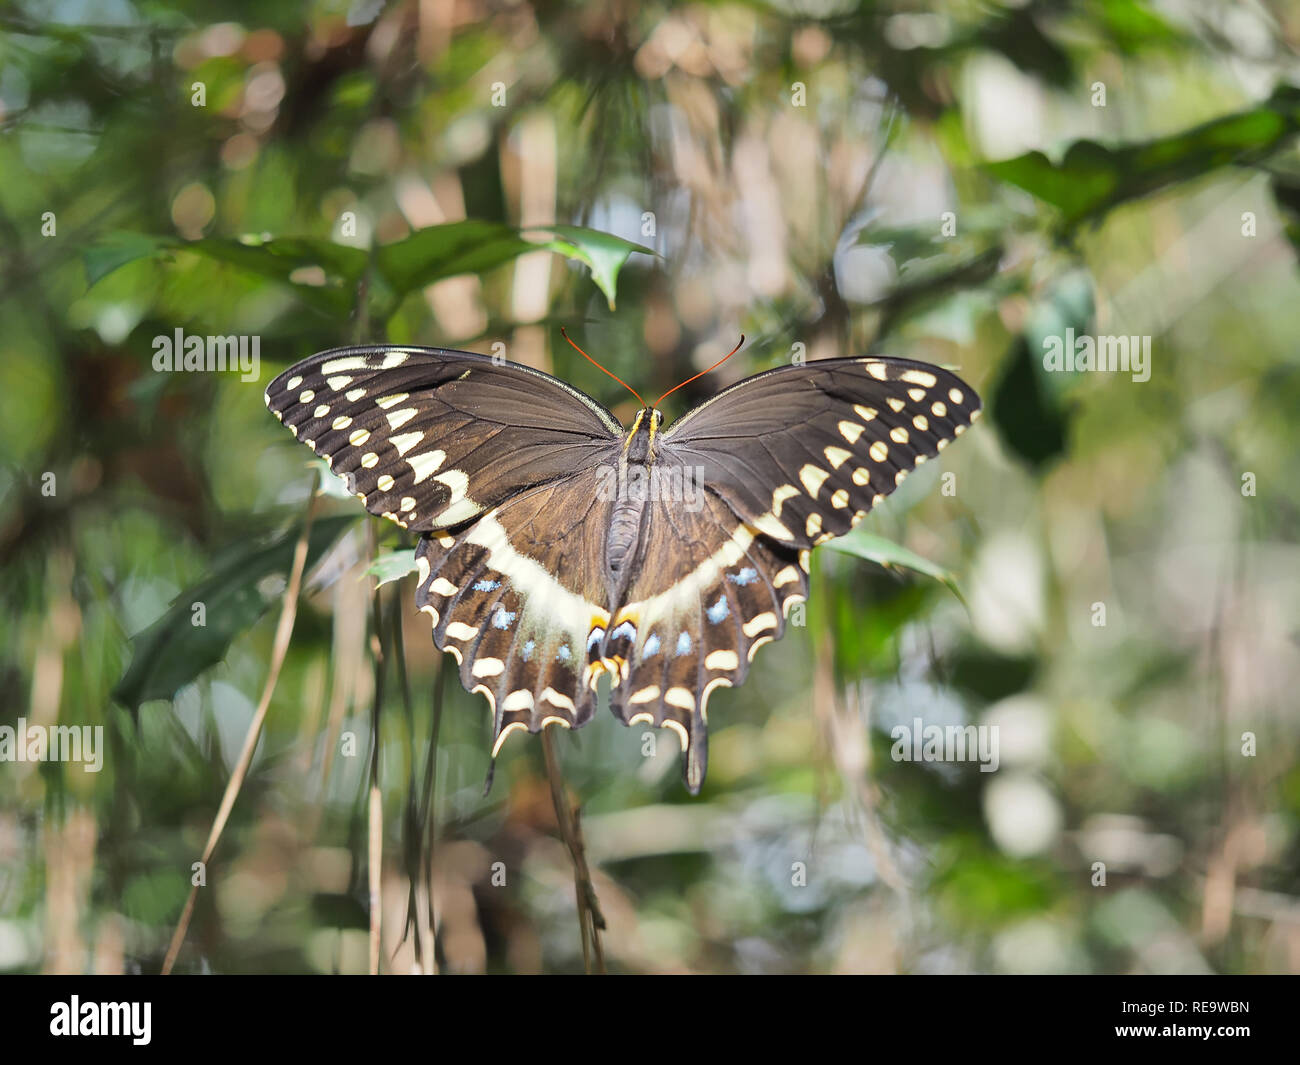 Laurel swallowtail (Papilio palamedes) butterfly in Texas, USA Stock Photo